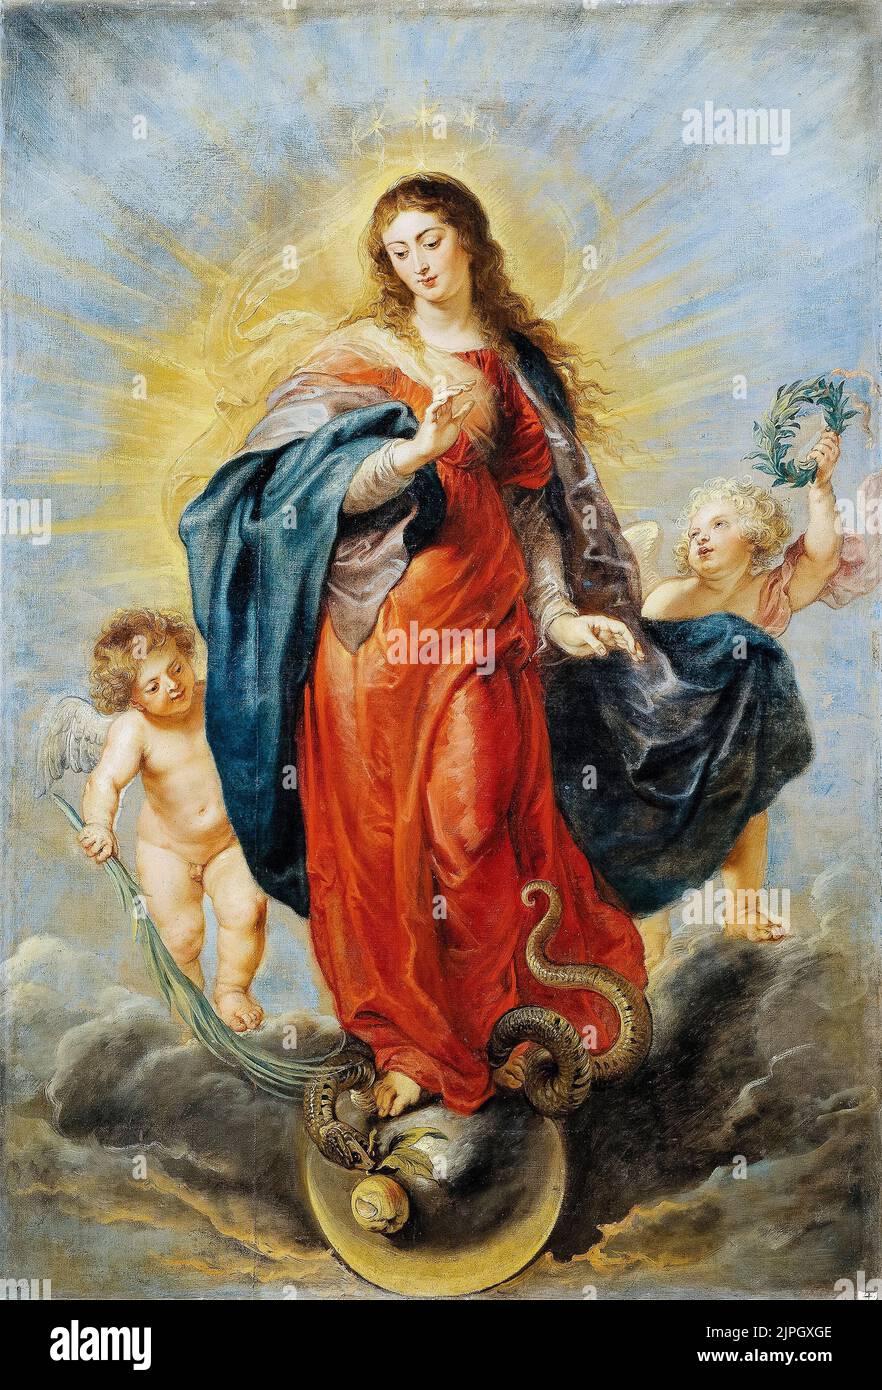 Peter Paul Rubens, Immaculate Conception, painting in oil on canvas, 1628-1629 Stock Photo